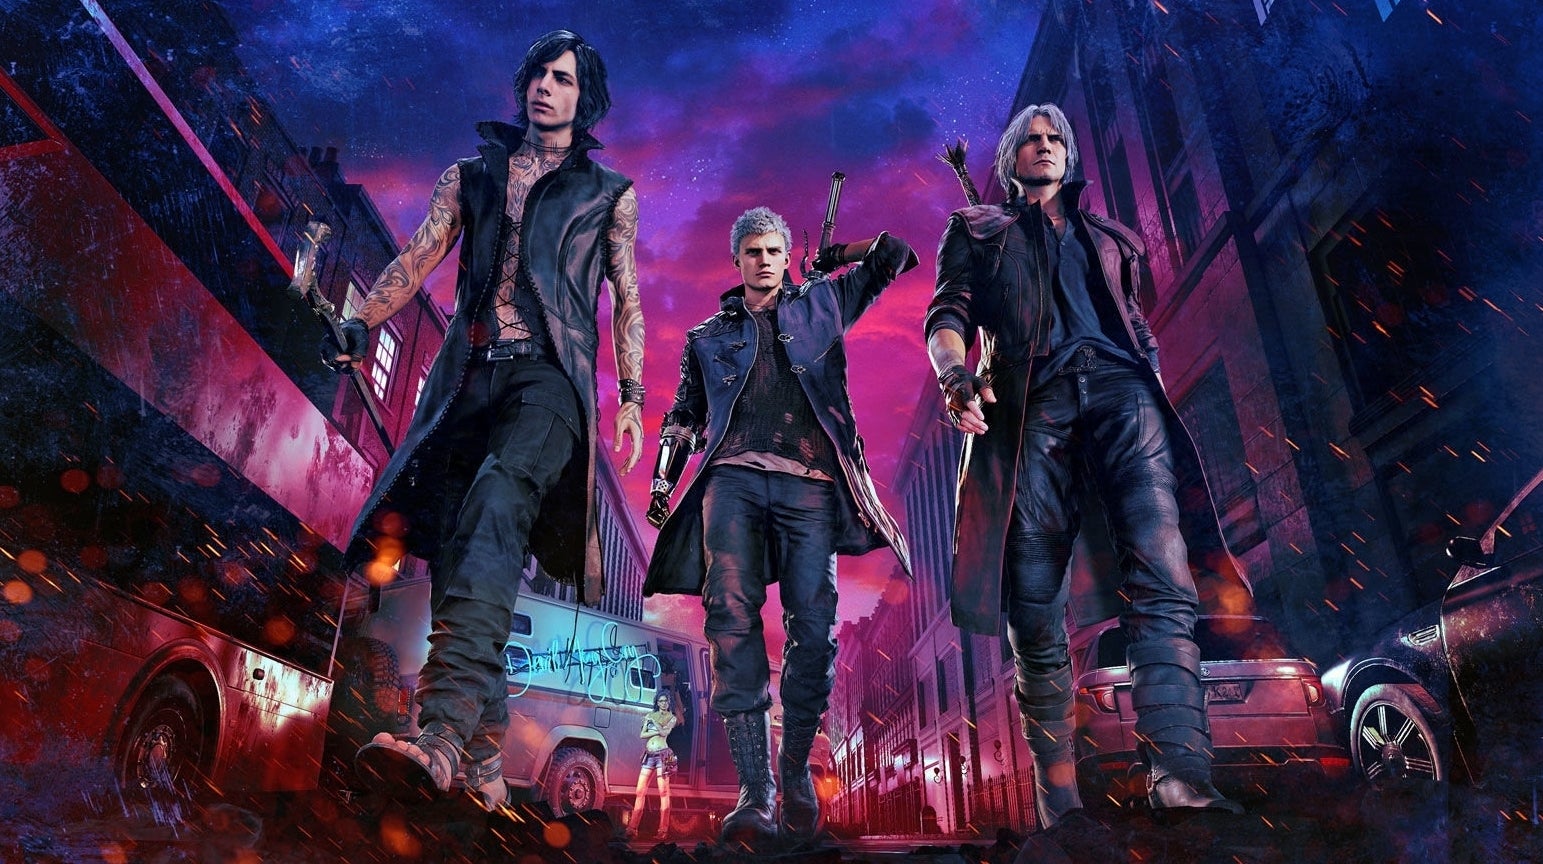 Image for Devil May Cry 5 has already overtaken DmC in sales